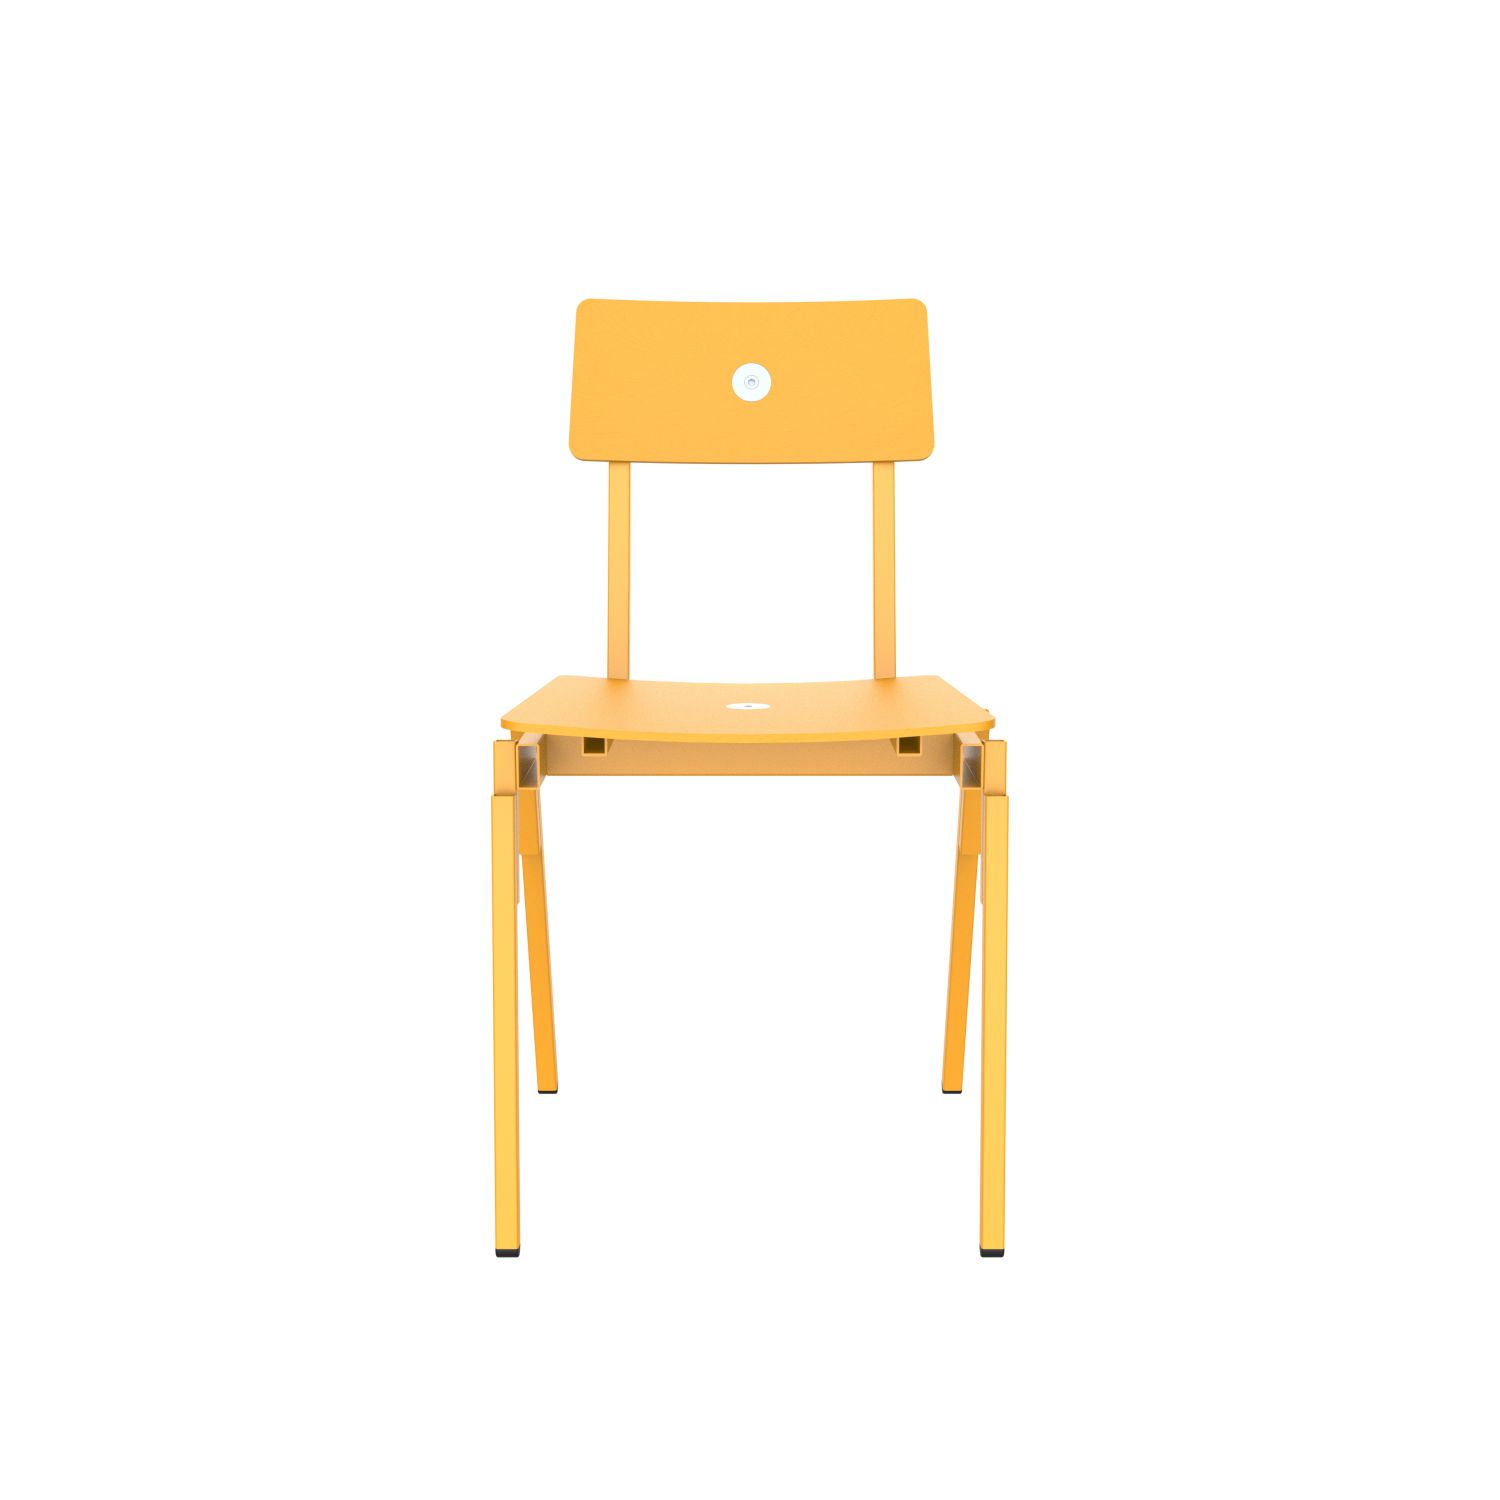 lensvelt piet hein eek mitw wooden chair without armrests signal yellow ral1003 signal yellow ral1003 hard leg ends